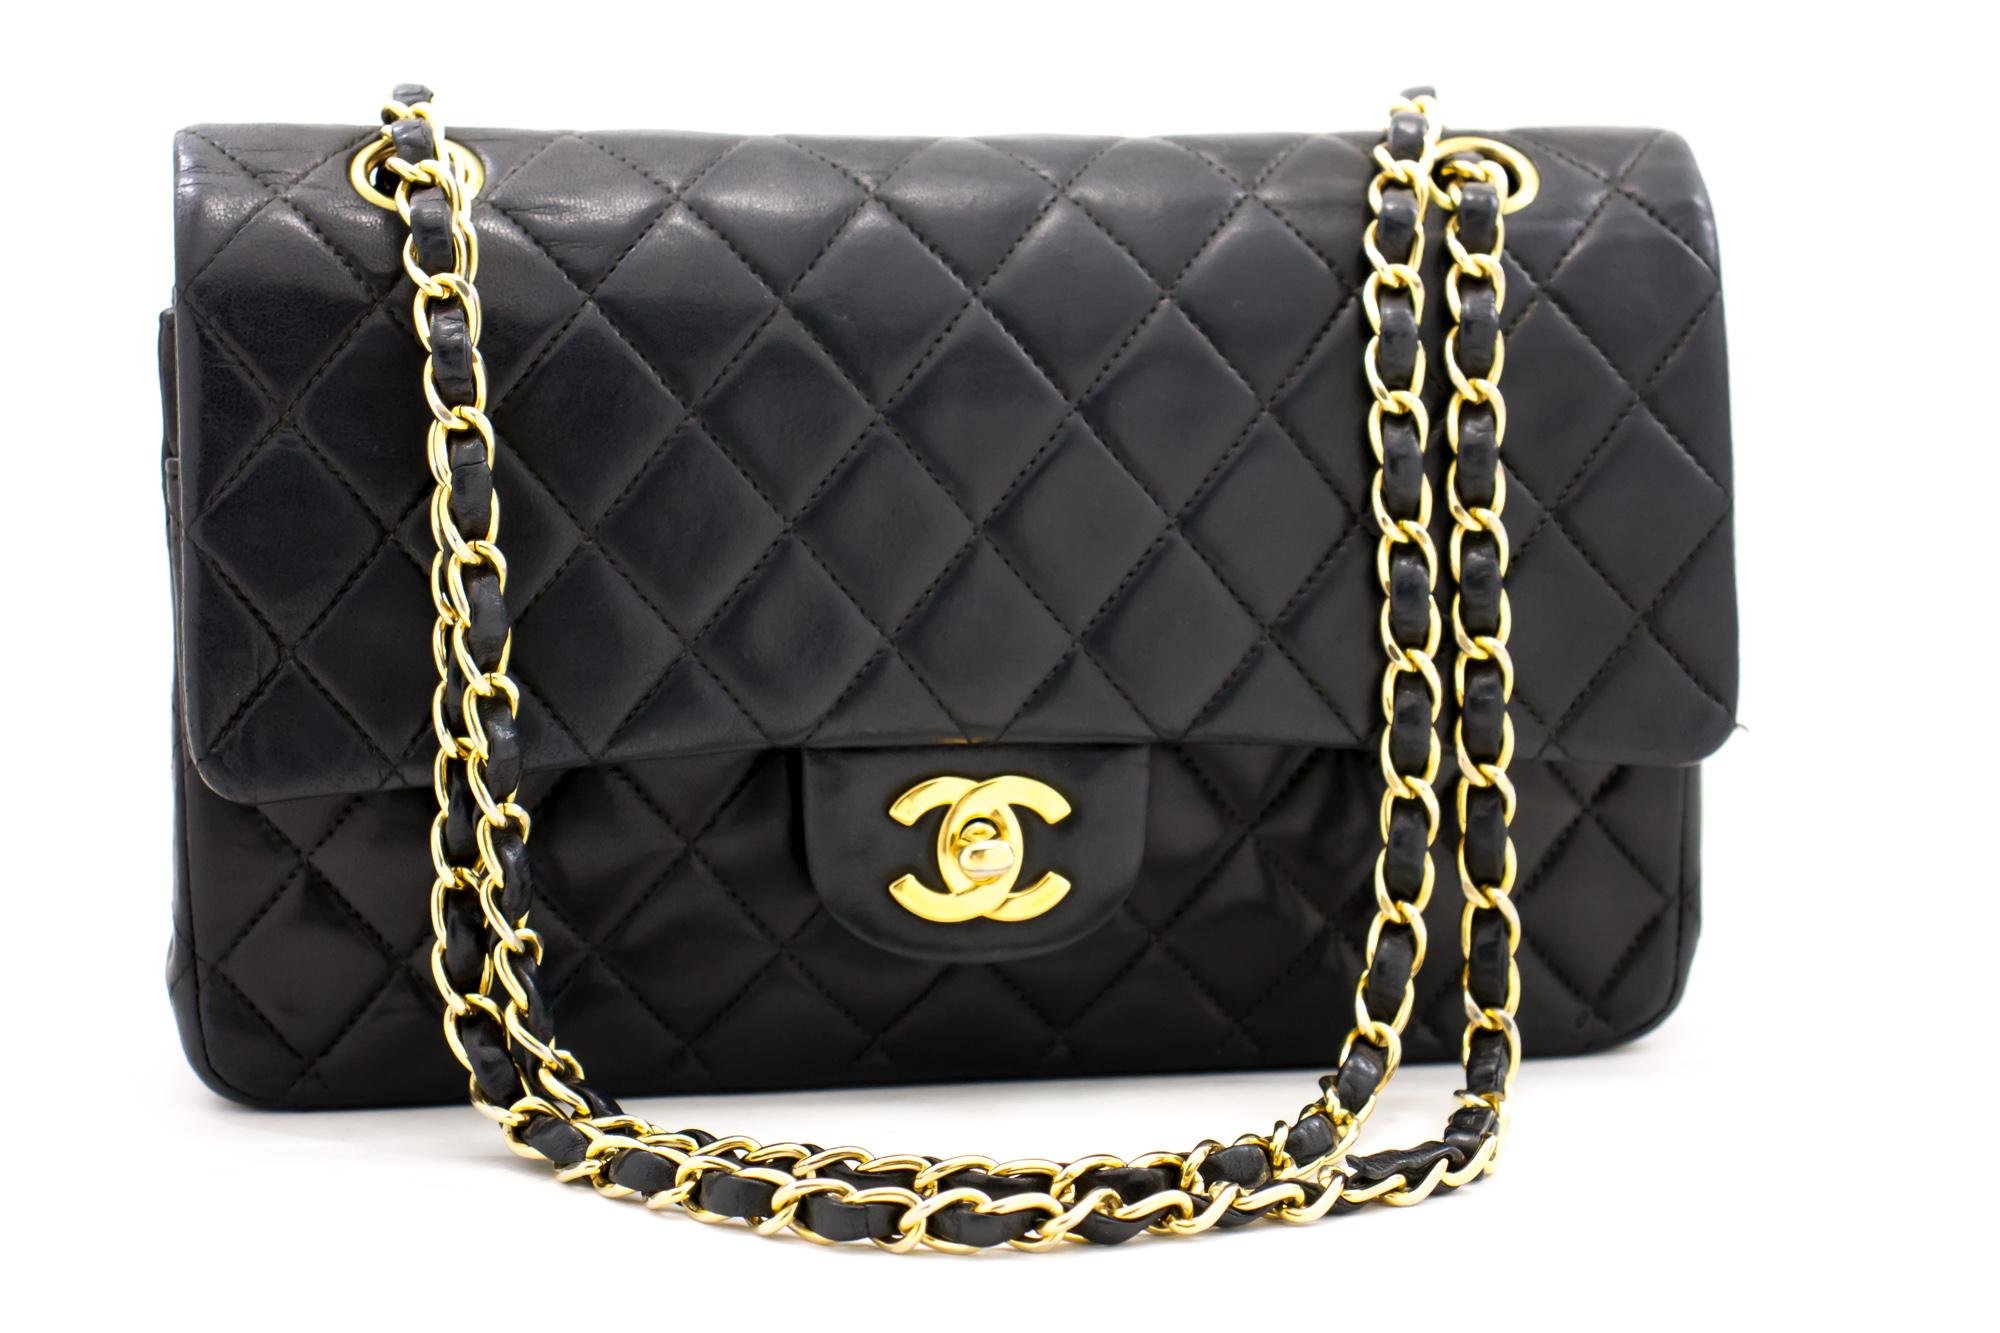 An authentic CHANEL 2.55 Classic Double Flap Medium Chain Shoulder Bag Black made of black Lambskin. The color is Black. The outside material is Leather. The pattern is Solid. This item is Contemporary. The year of manufacture would be 2000-2 0 0 2